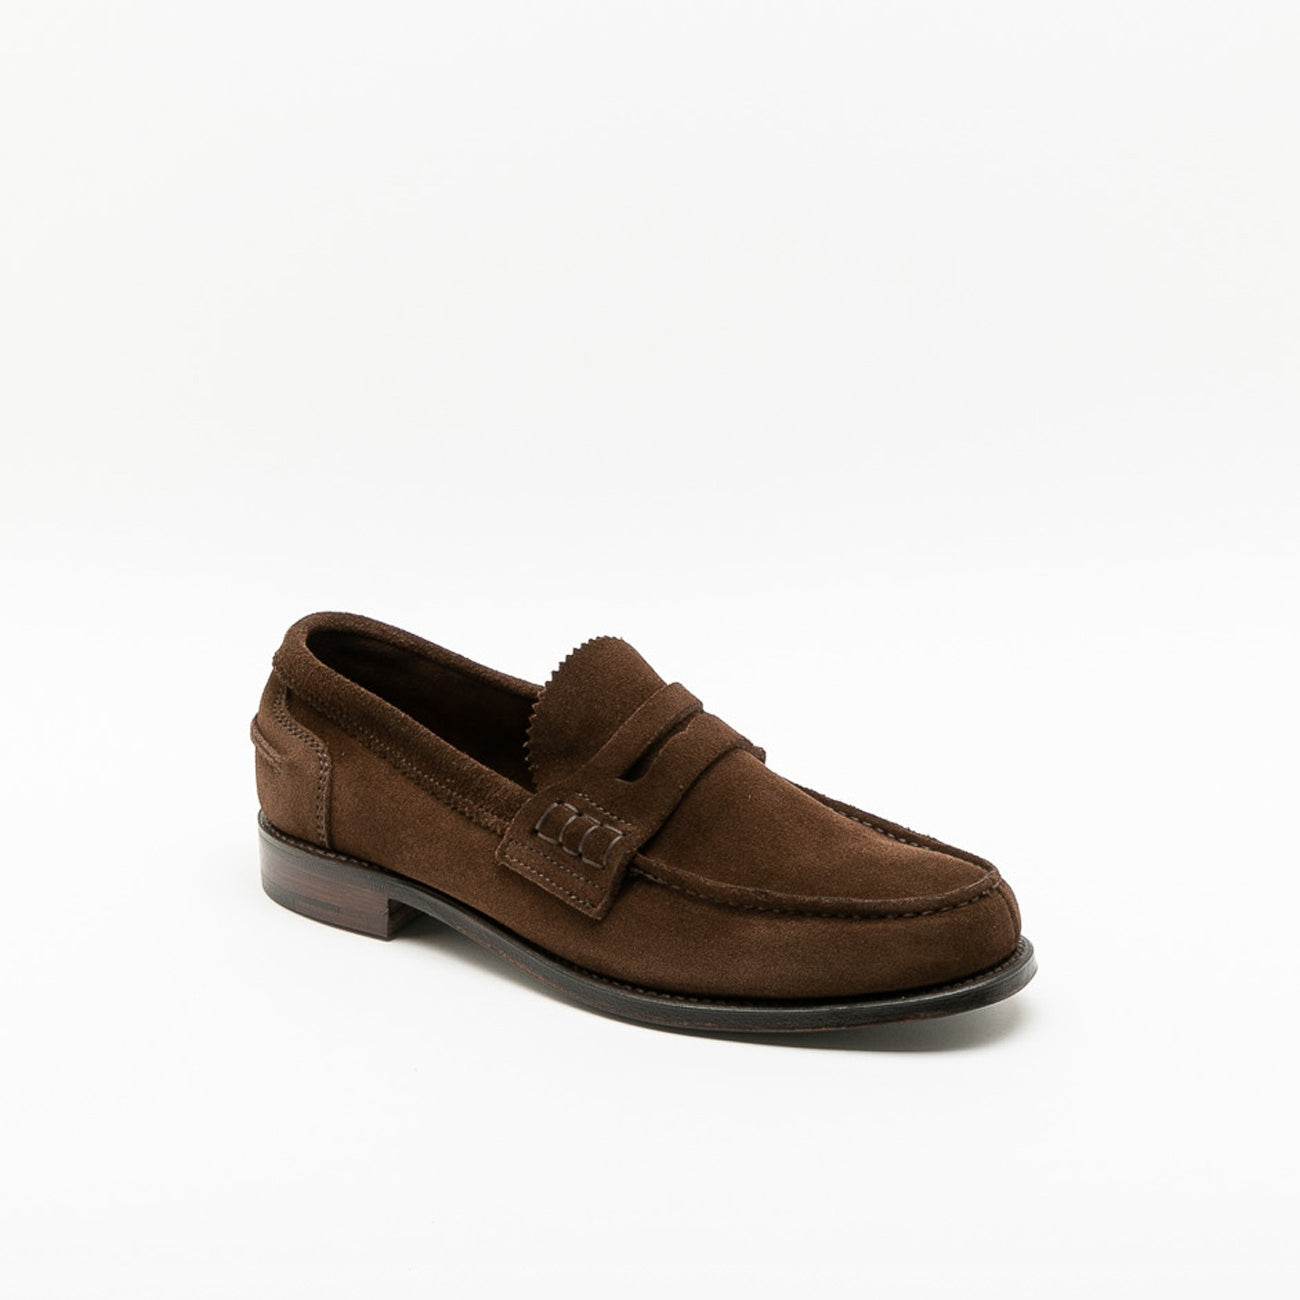 Cheaney Joseph & Sons plough suede loafer